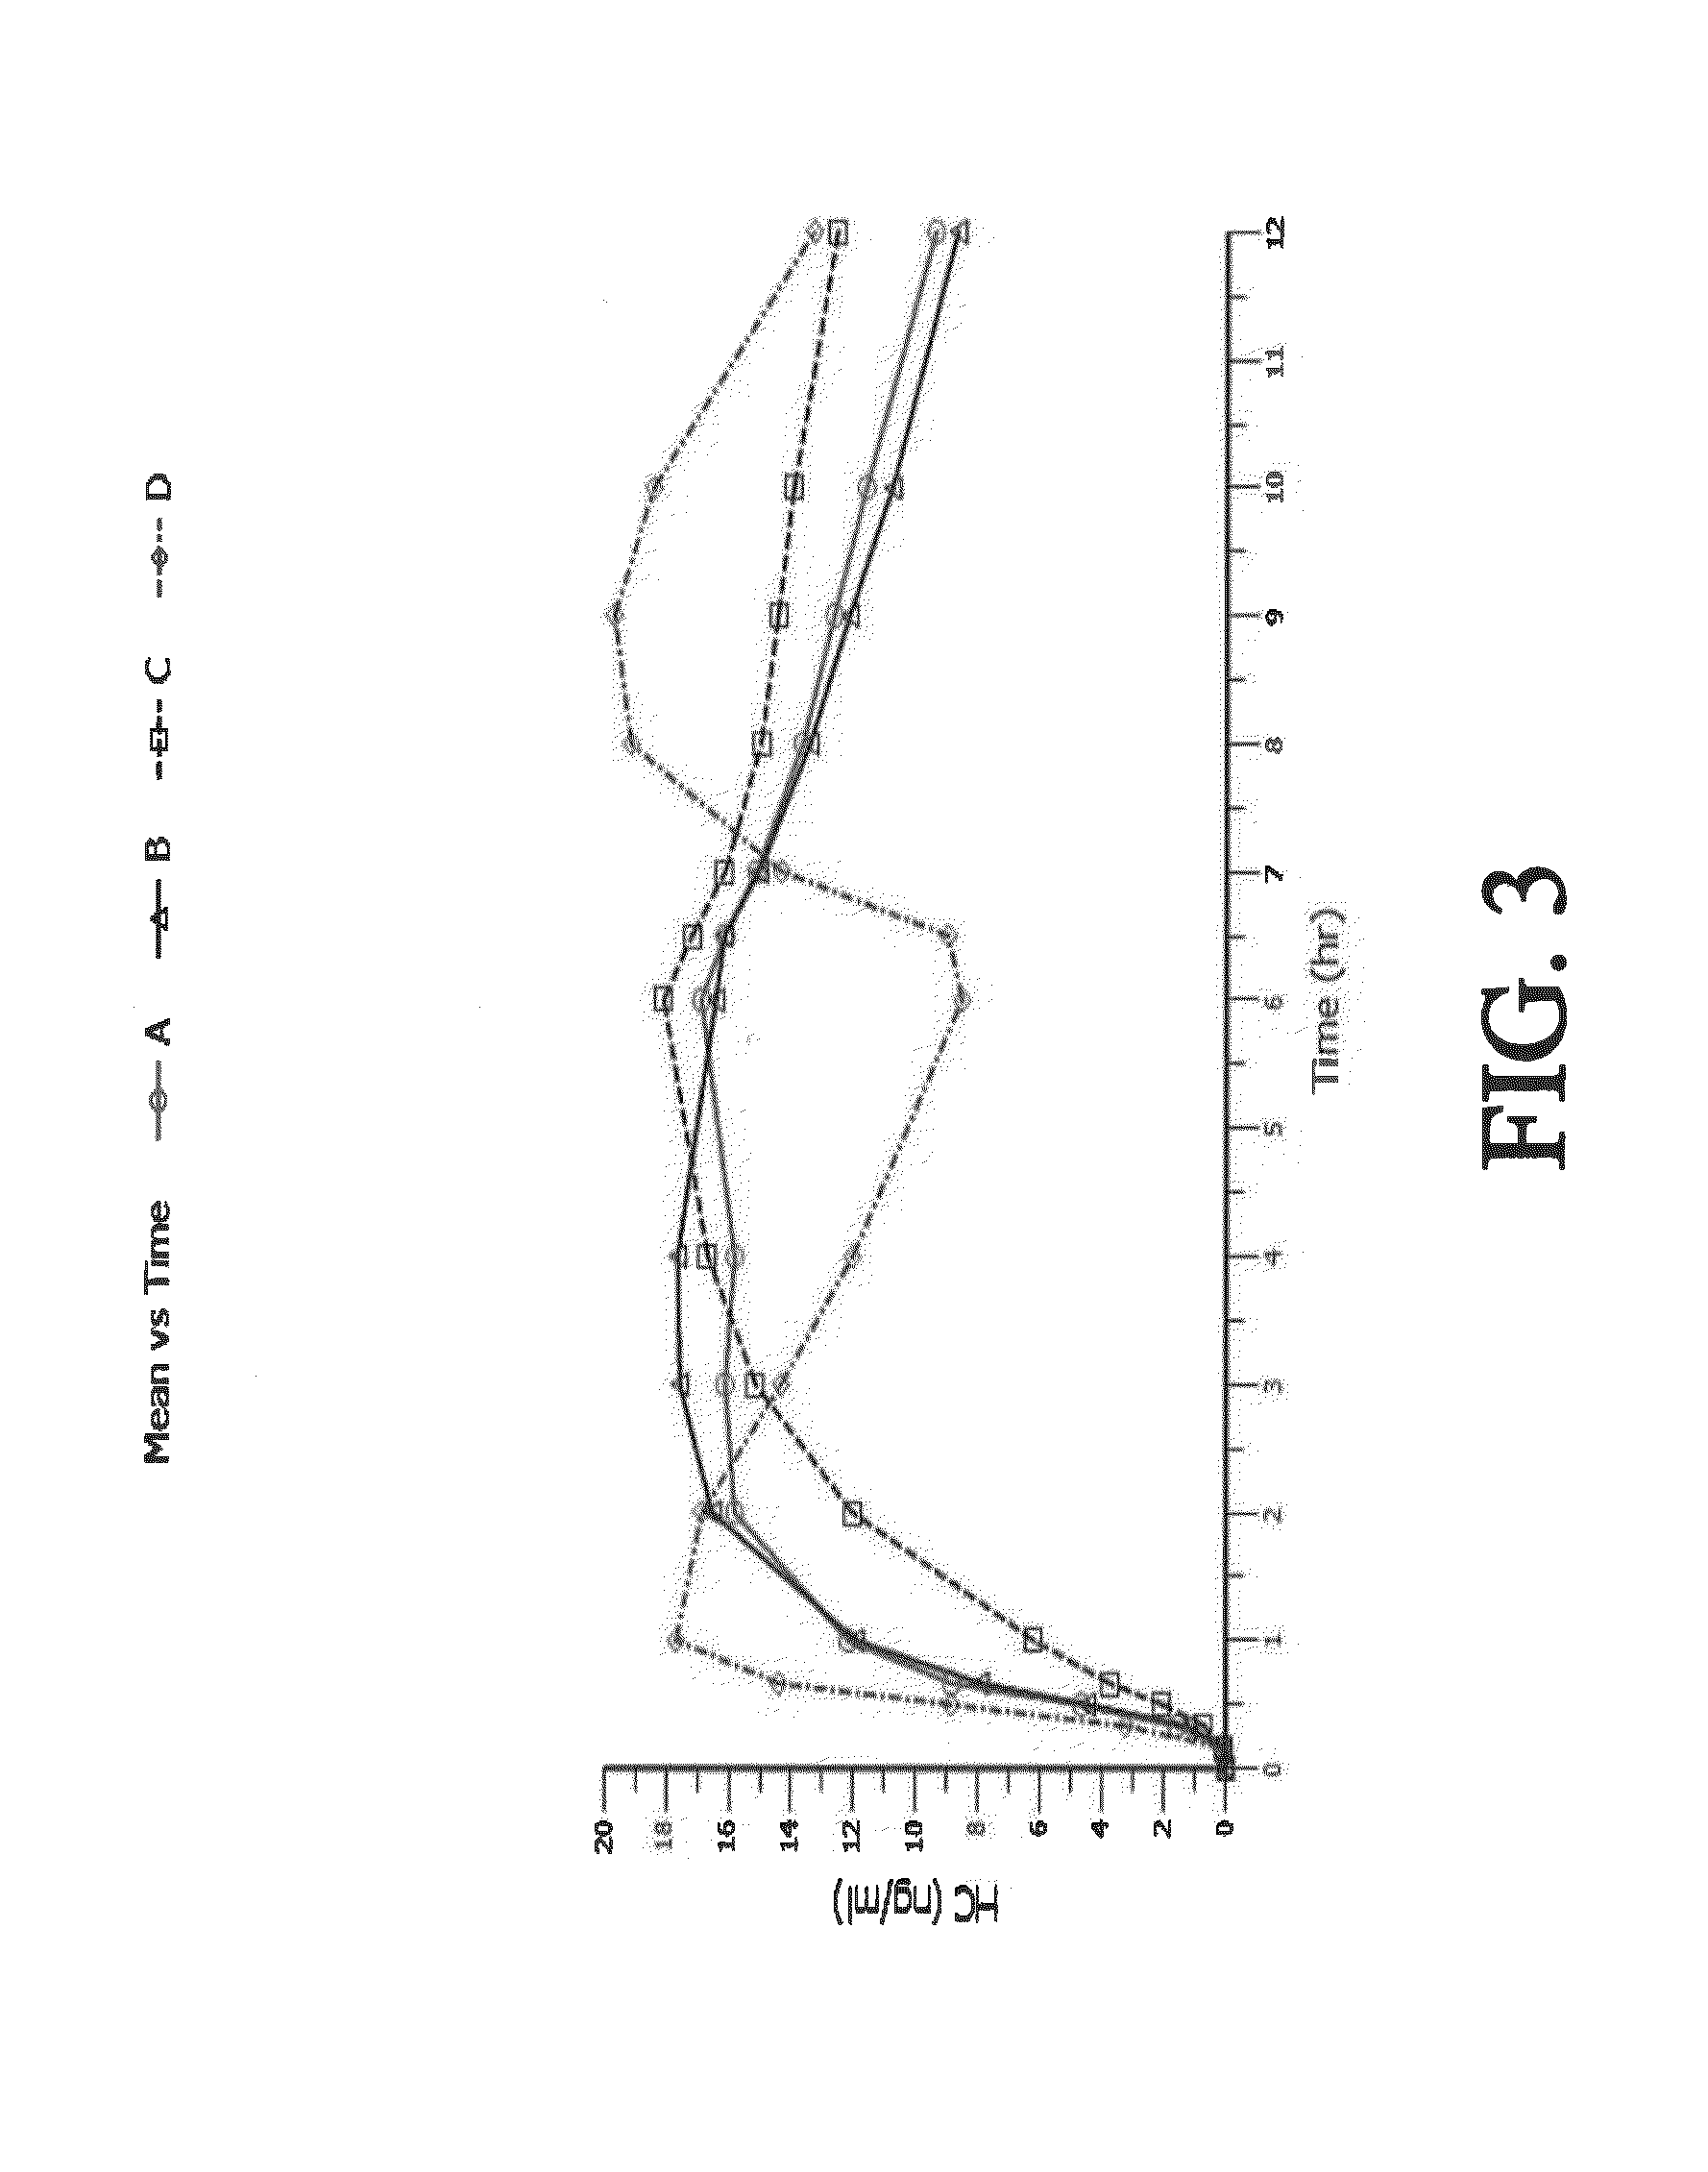 Tamper Resistant Composition Comprising Hydrocodone And Acetaminophen For Rapid Onset And Extended Duration Of Analgesia